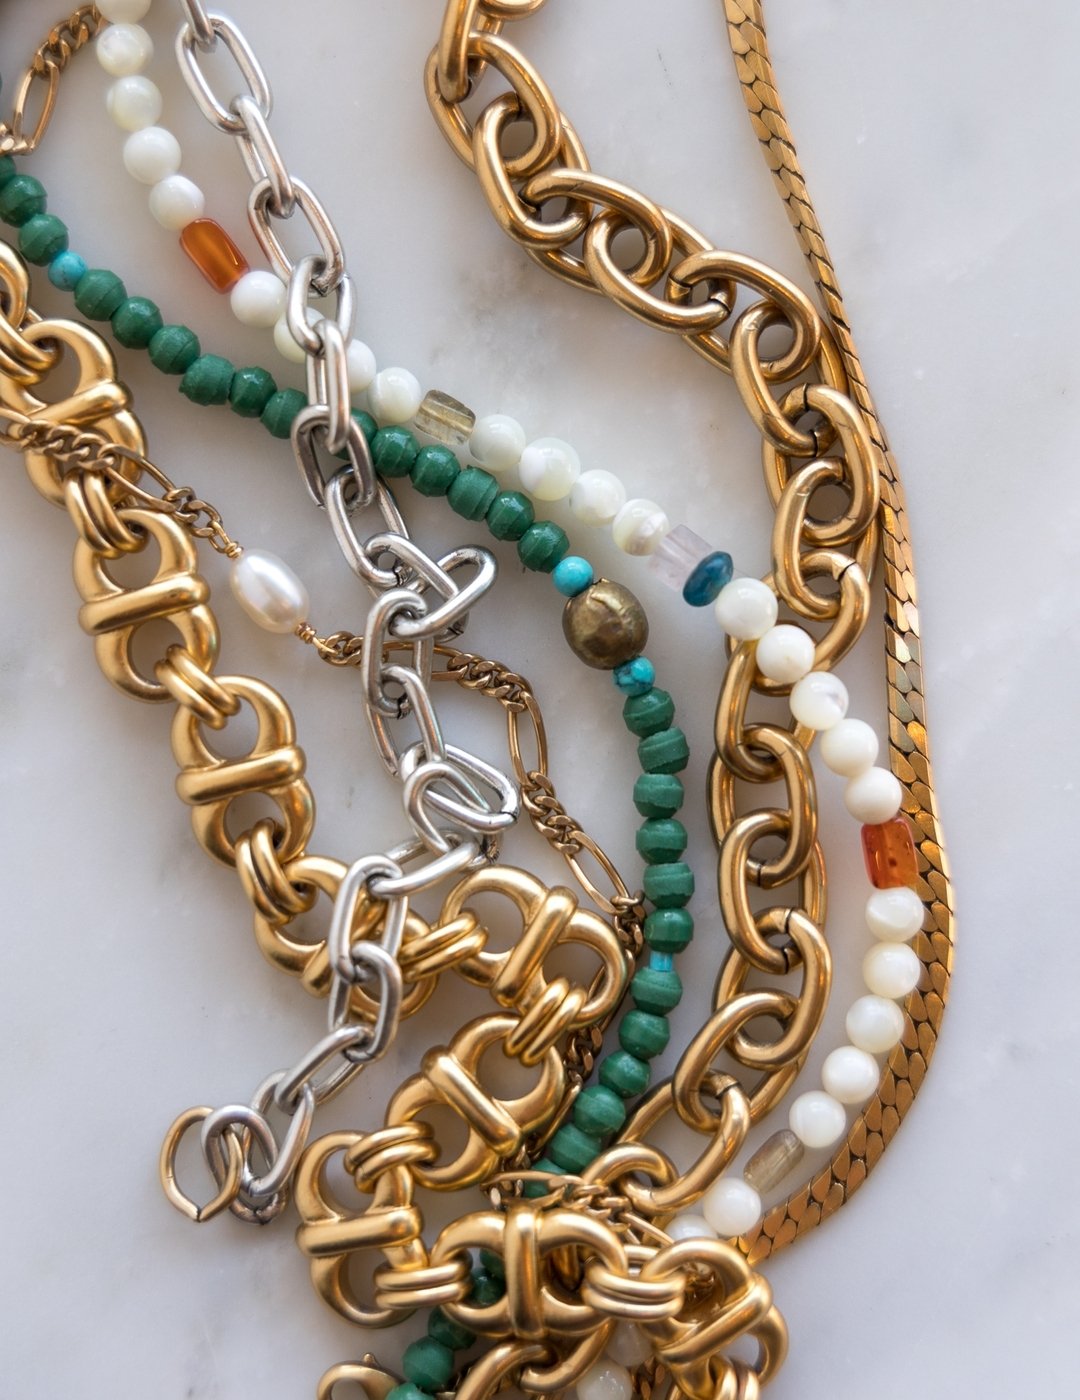 &quot;Mama, I always know when you are coming around the corner, because you jingle.&quot; -my son at age 8

#vintagejewelry #vintagechainnecklace #chunkygoldnecklace #colorfuljewelry #neckless #layeringnecklaces #exvotovintage #exvoto #apparel #jewe